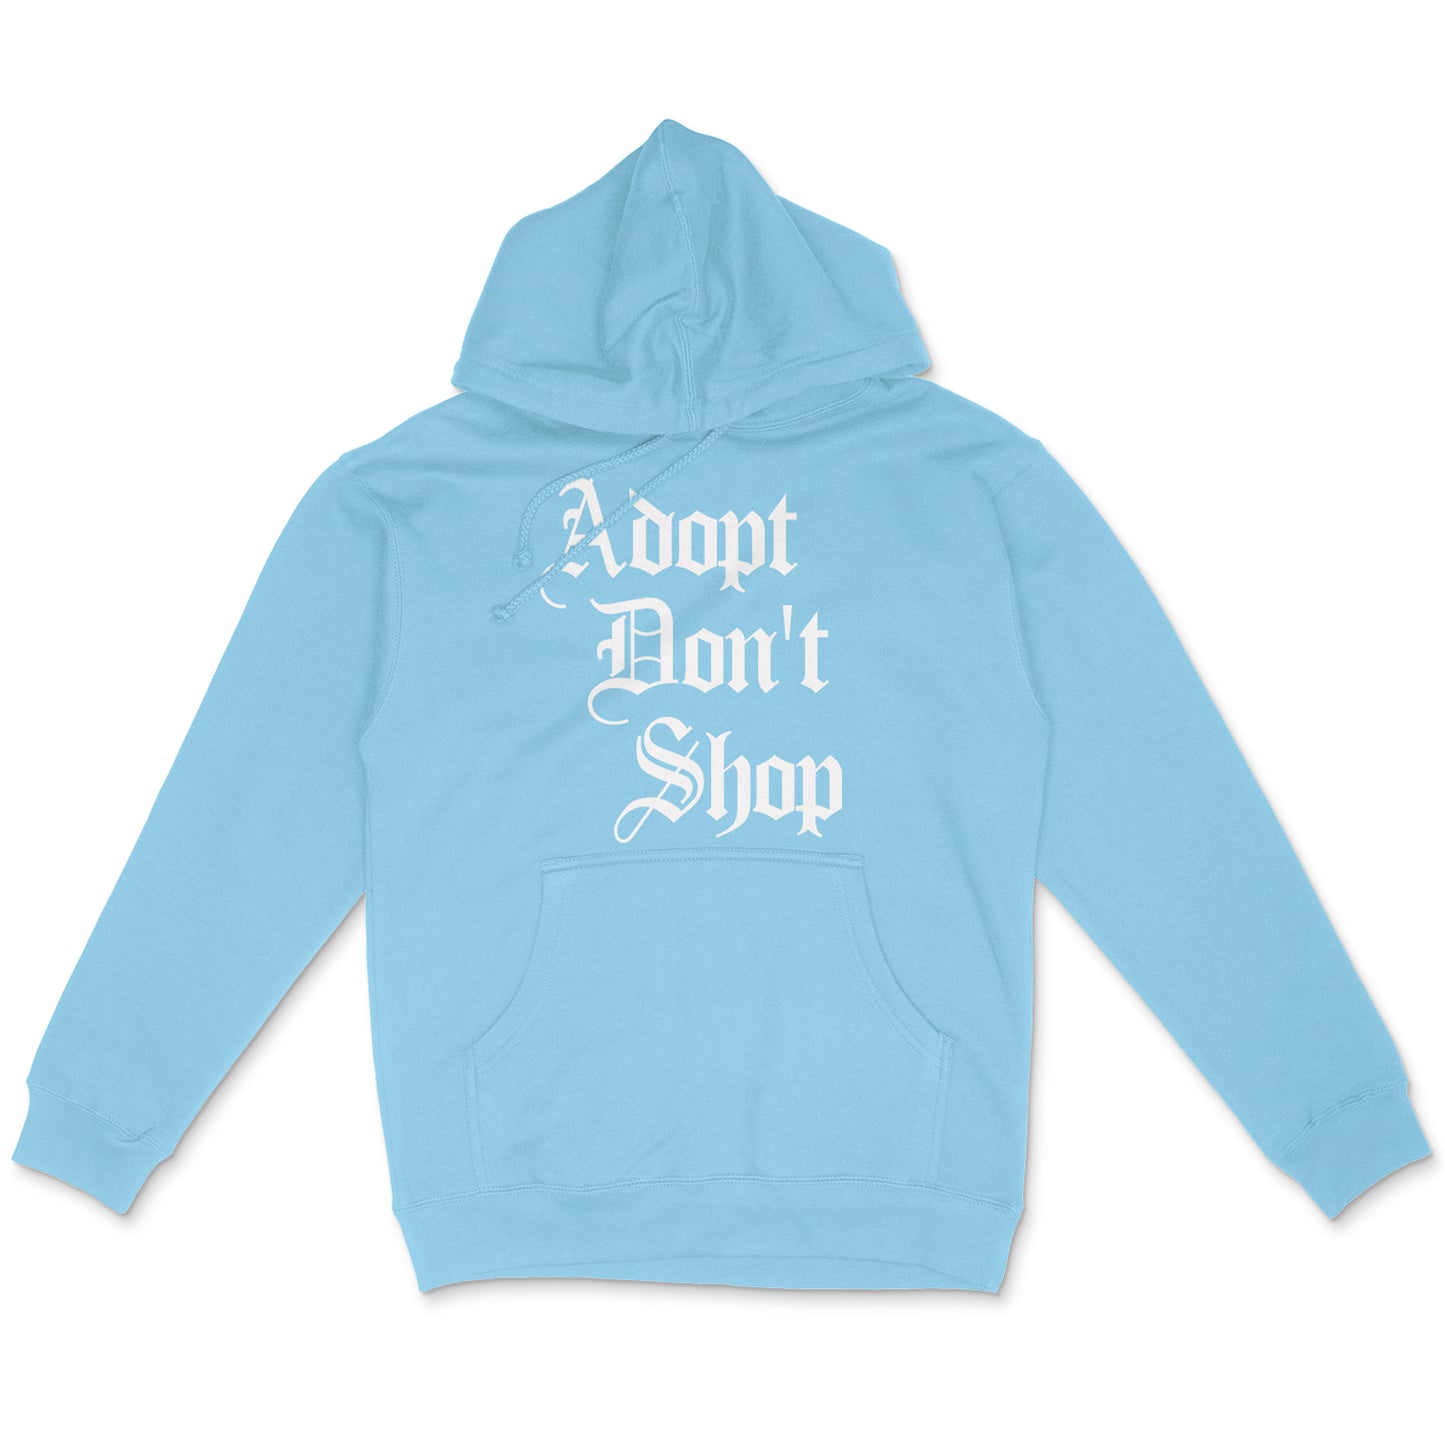 Adopt Don't Shop Pullover Hoodie